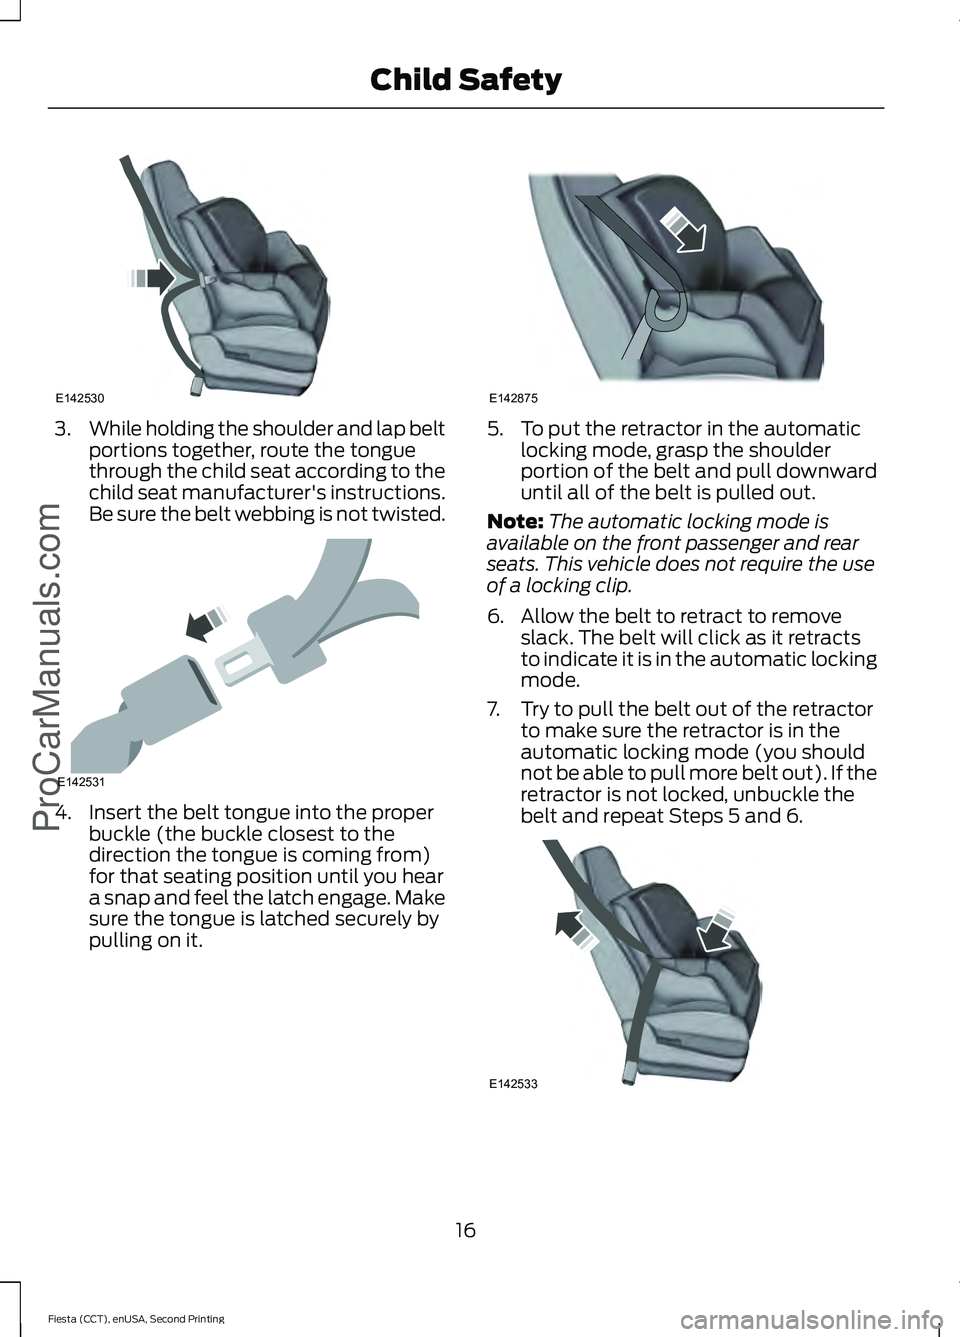 FORD FIESTA 2015  Owners Manual 3.
While holding the shoulder and lap belt
portions together, route the tongue
through the child seat according to the
child seat manufacturer's instructions.
Be sure the belt webbing is not twist